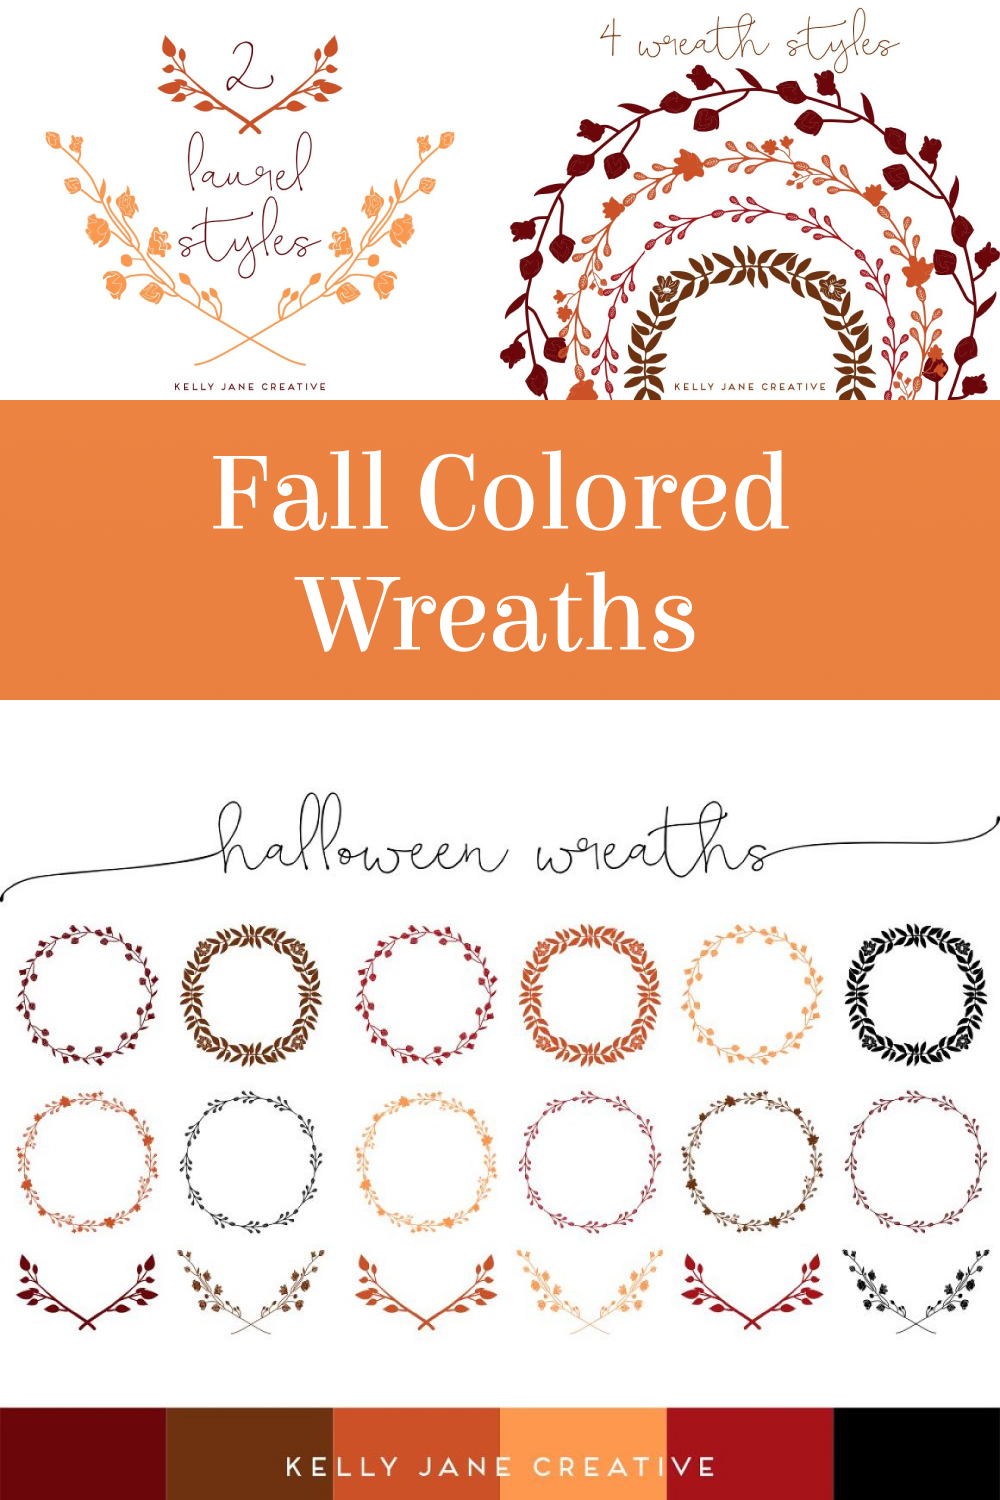 Fall colored wreaths of pinterest.